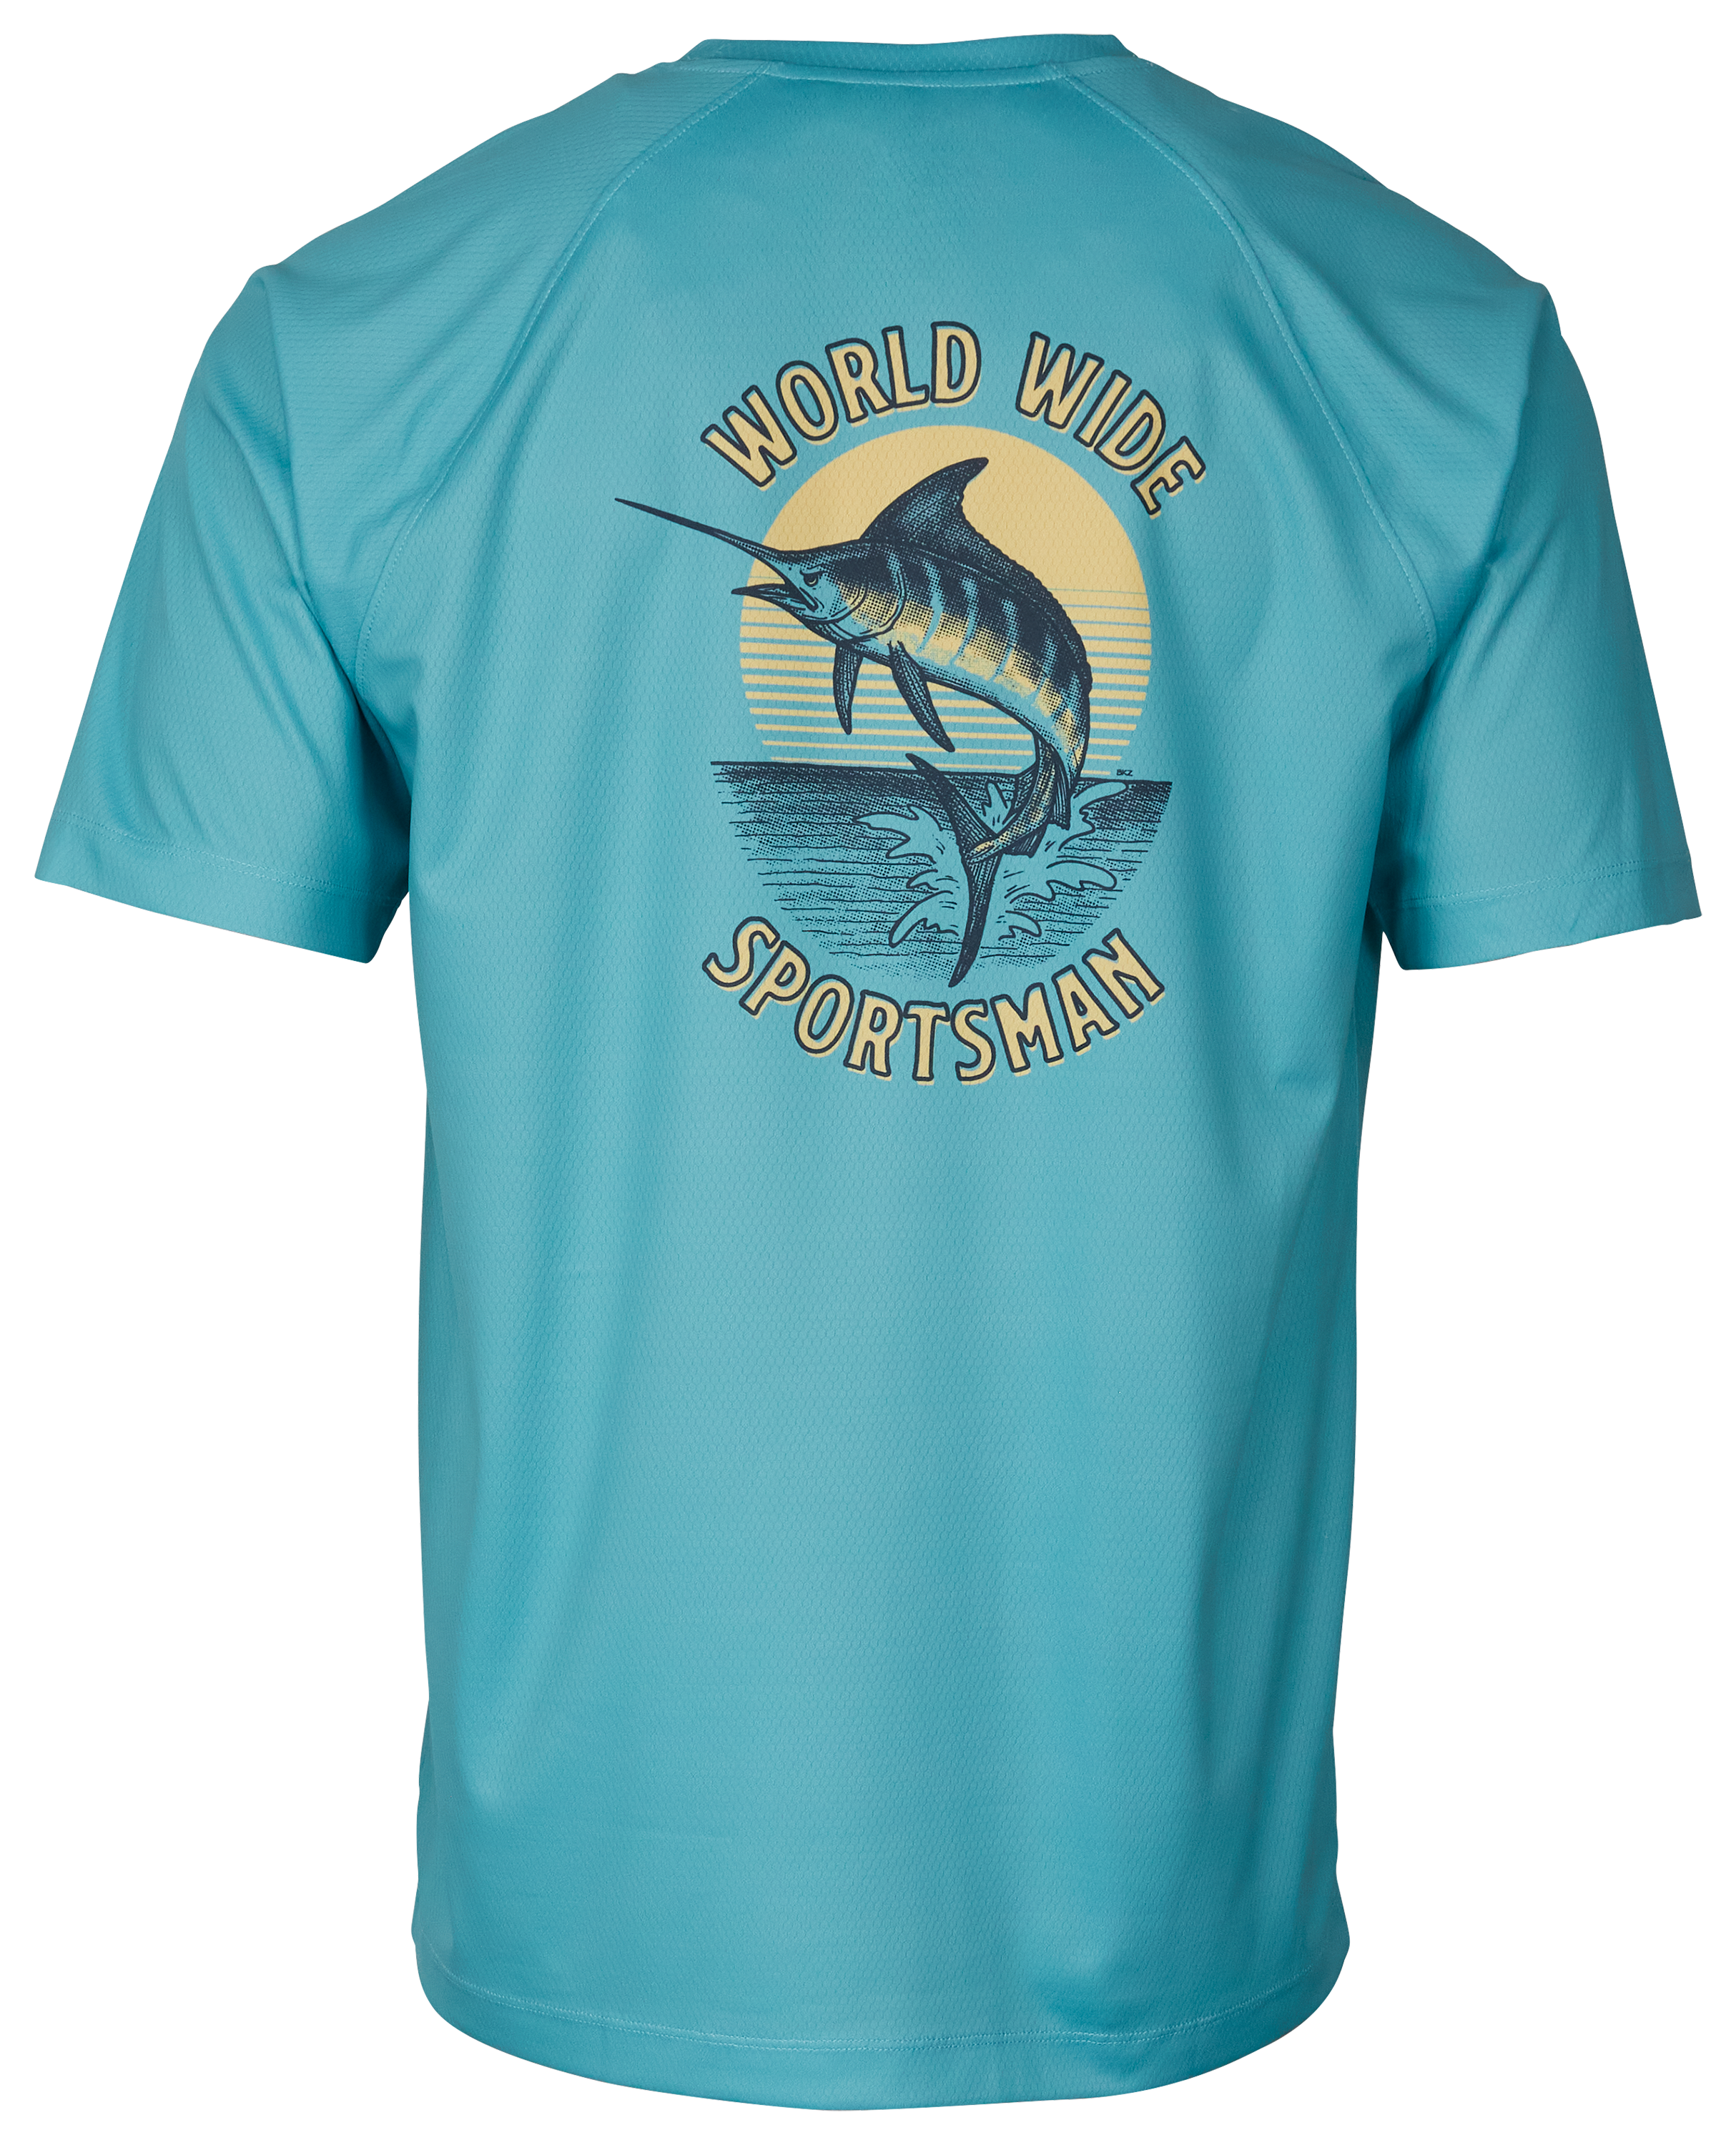 World Wide Sportsman Swordfish Sublimated Graphic Short-Sleeve T-Shirt For Men - Reef Waters - XL